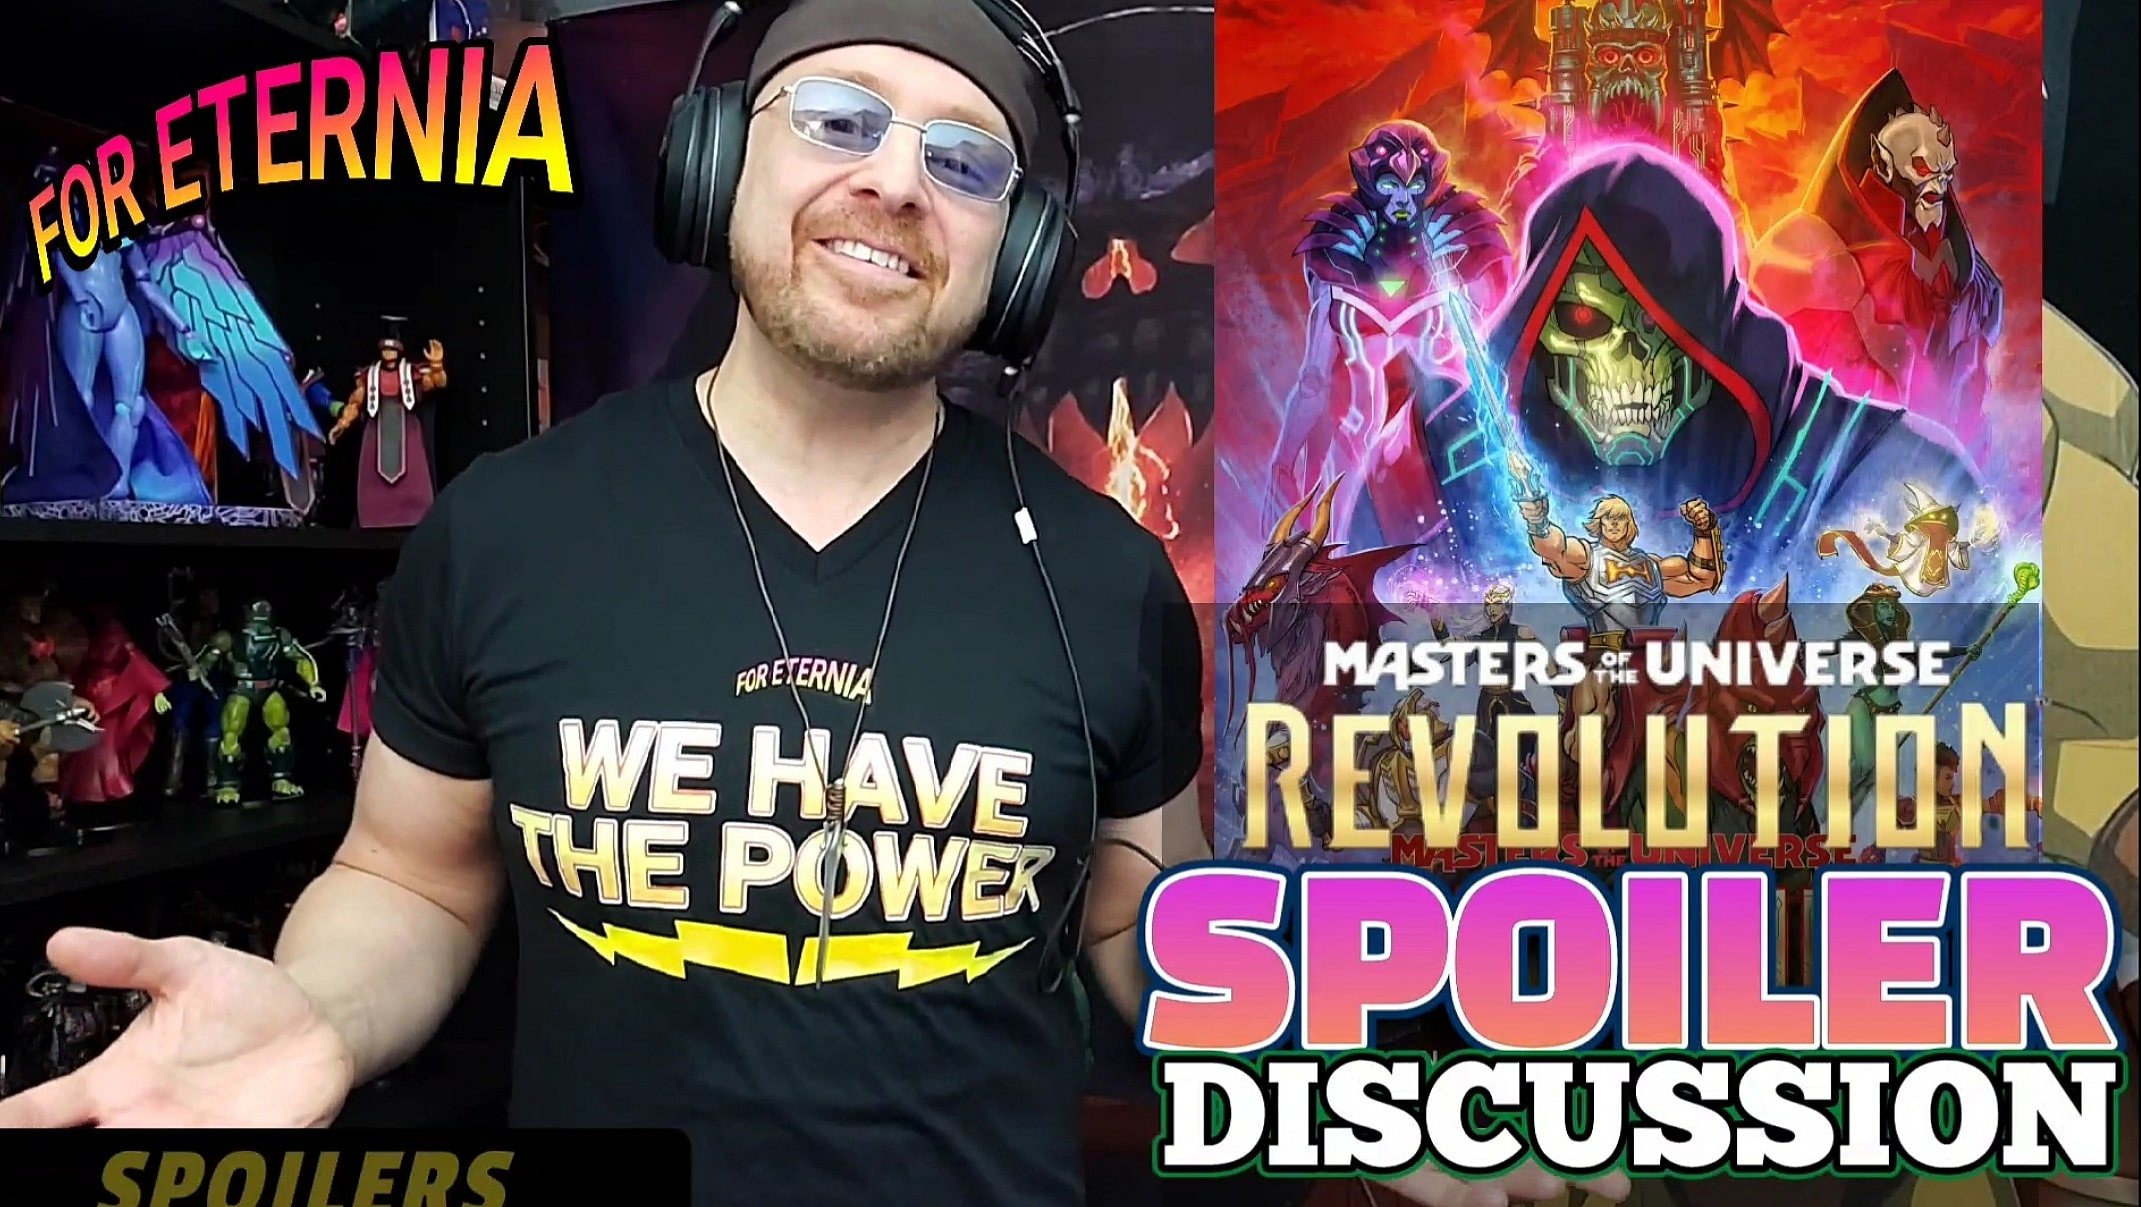 SPOILER TALK! Watch our Spoiler Discussion of ”Masters of the Universe: Revolution”